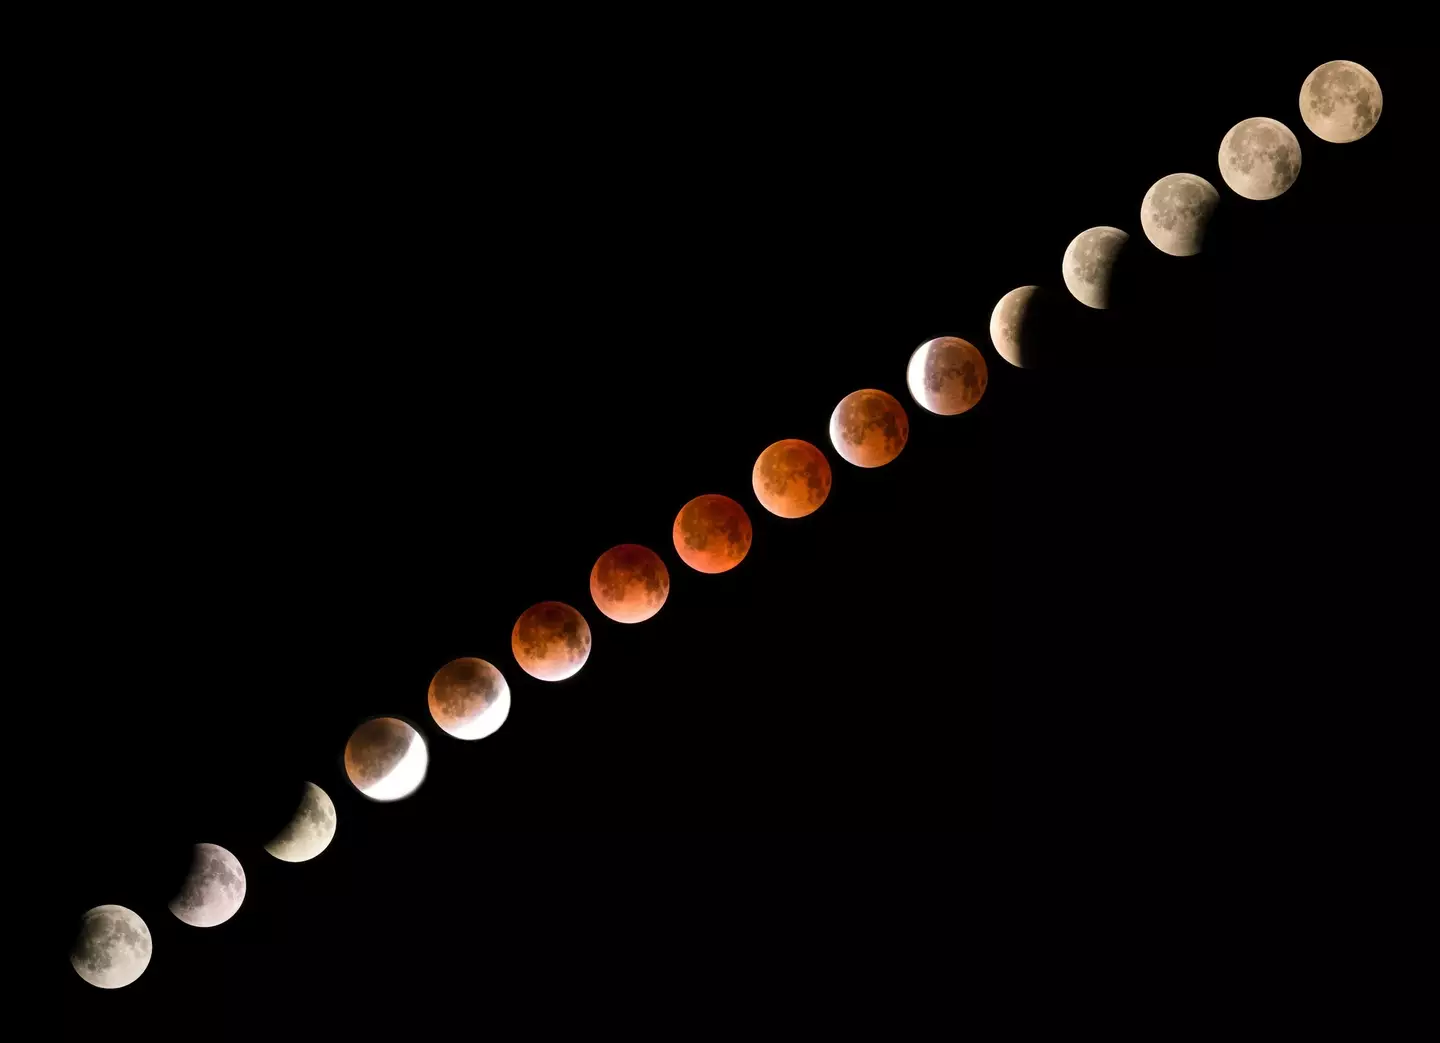 The moon will appear red during the total lunar eclipse.